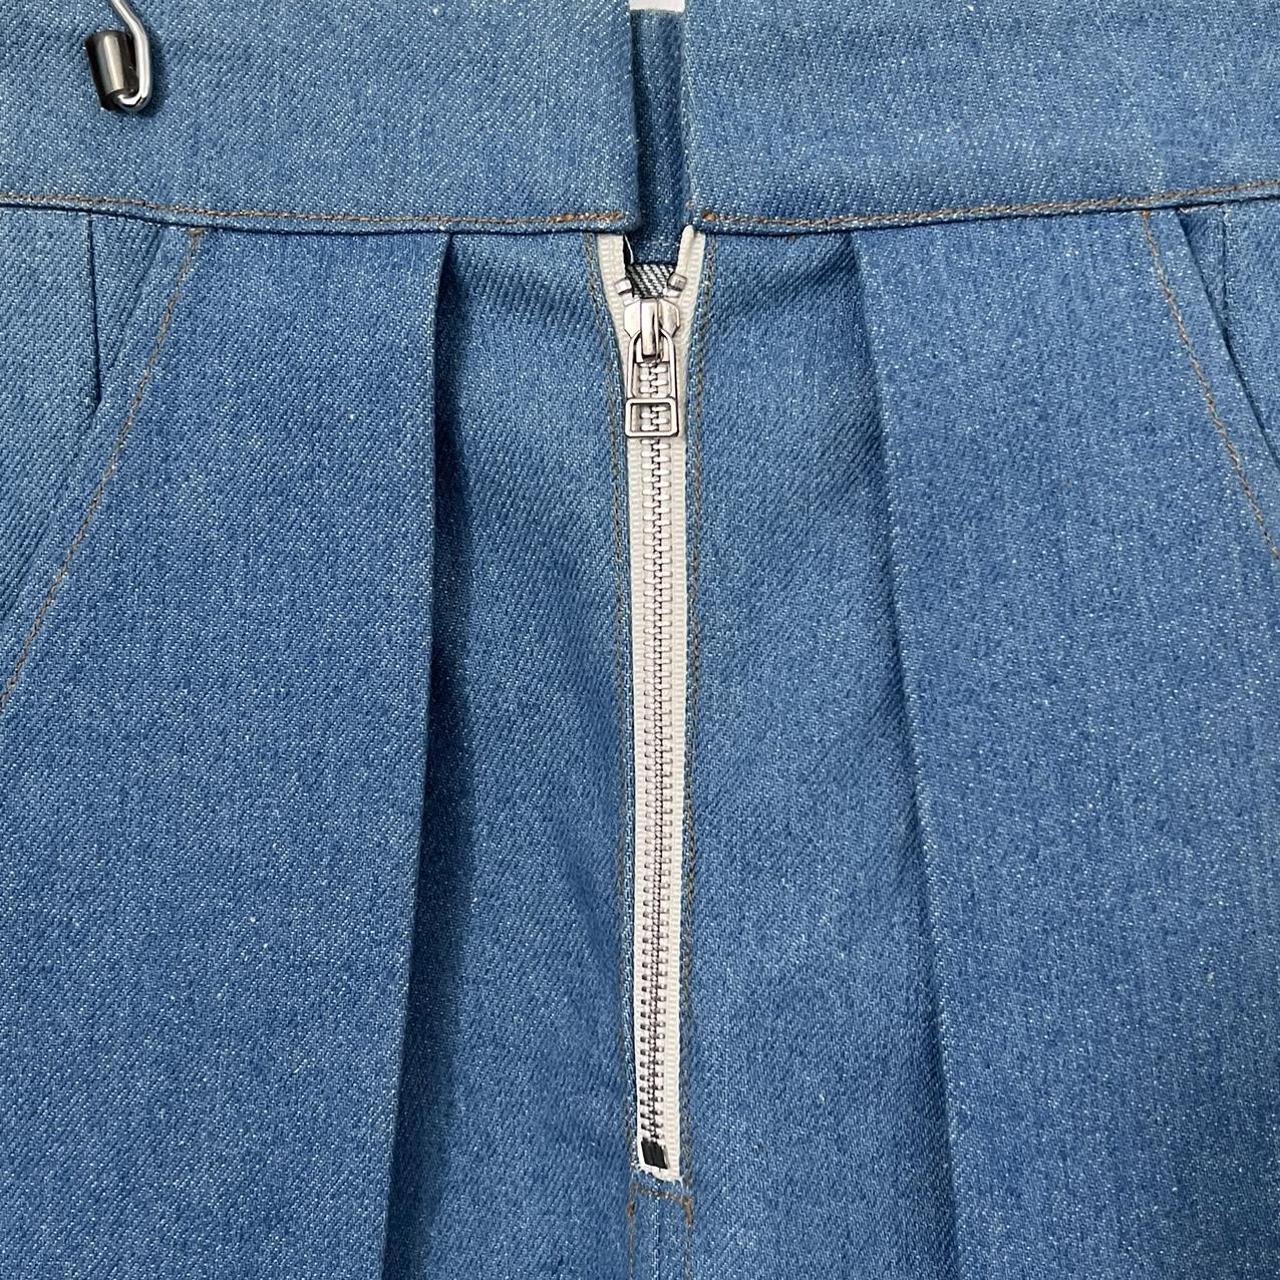 Product Image 3 - Deadstock Eckhaus Latta SS15 structured